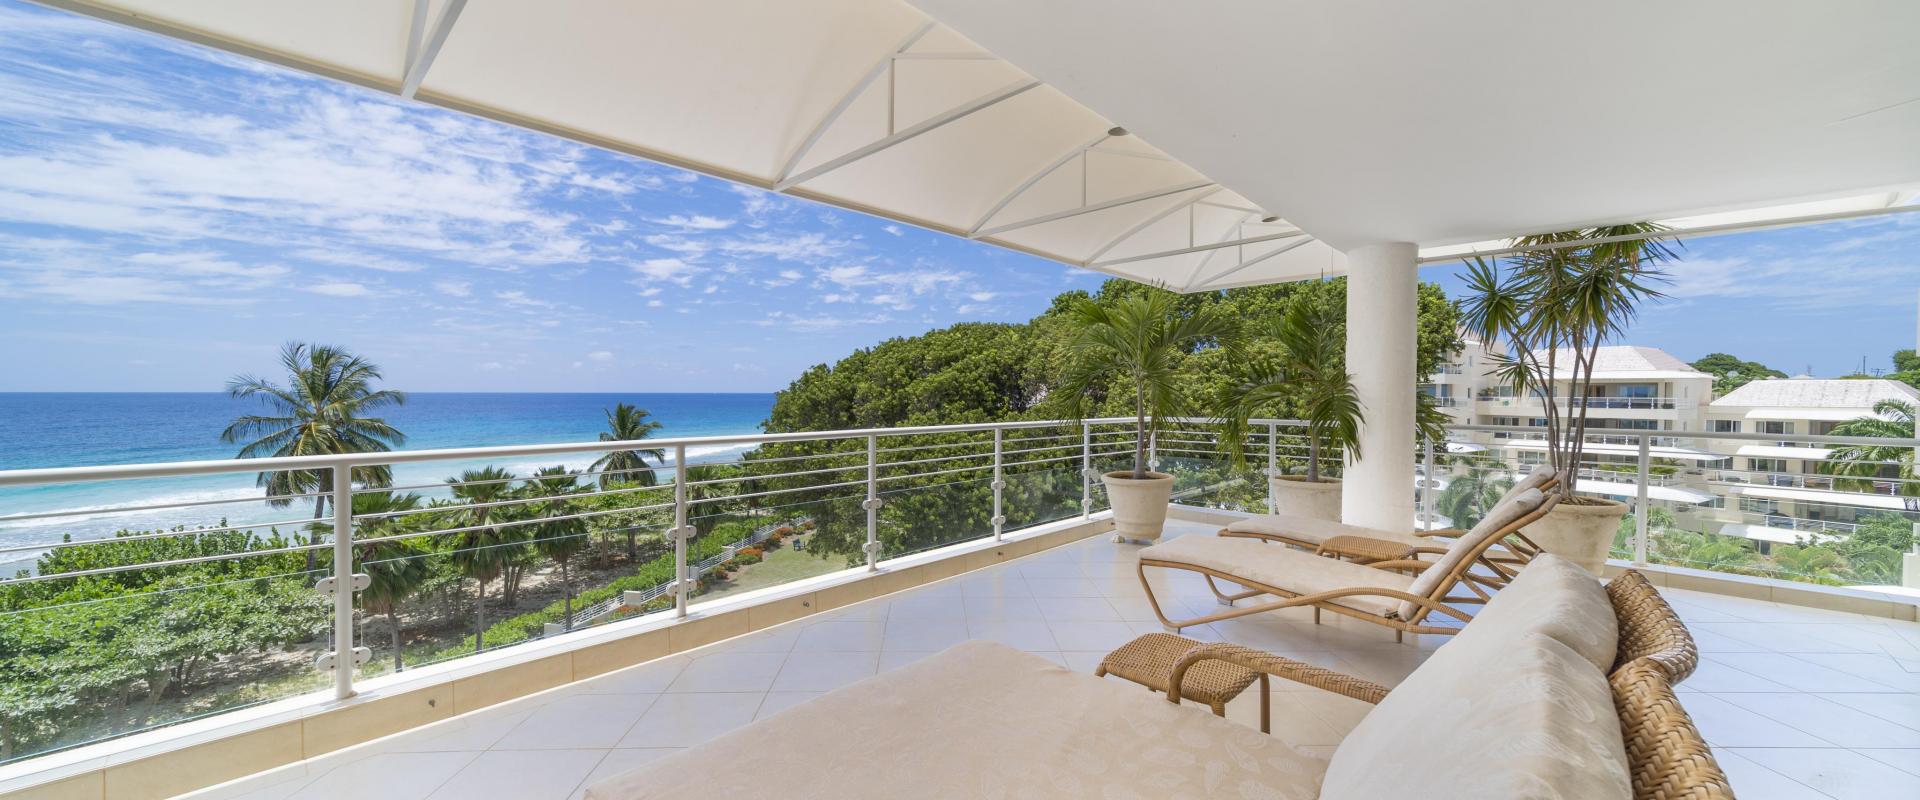 Palm Beach 502 Holiday Rental Barbados Outdoor Patio and Ocean View